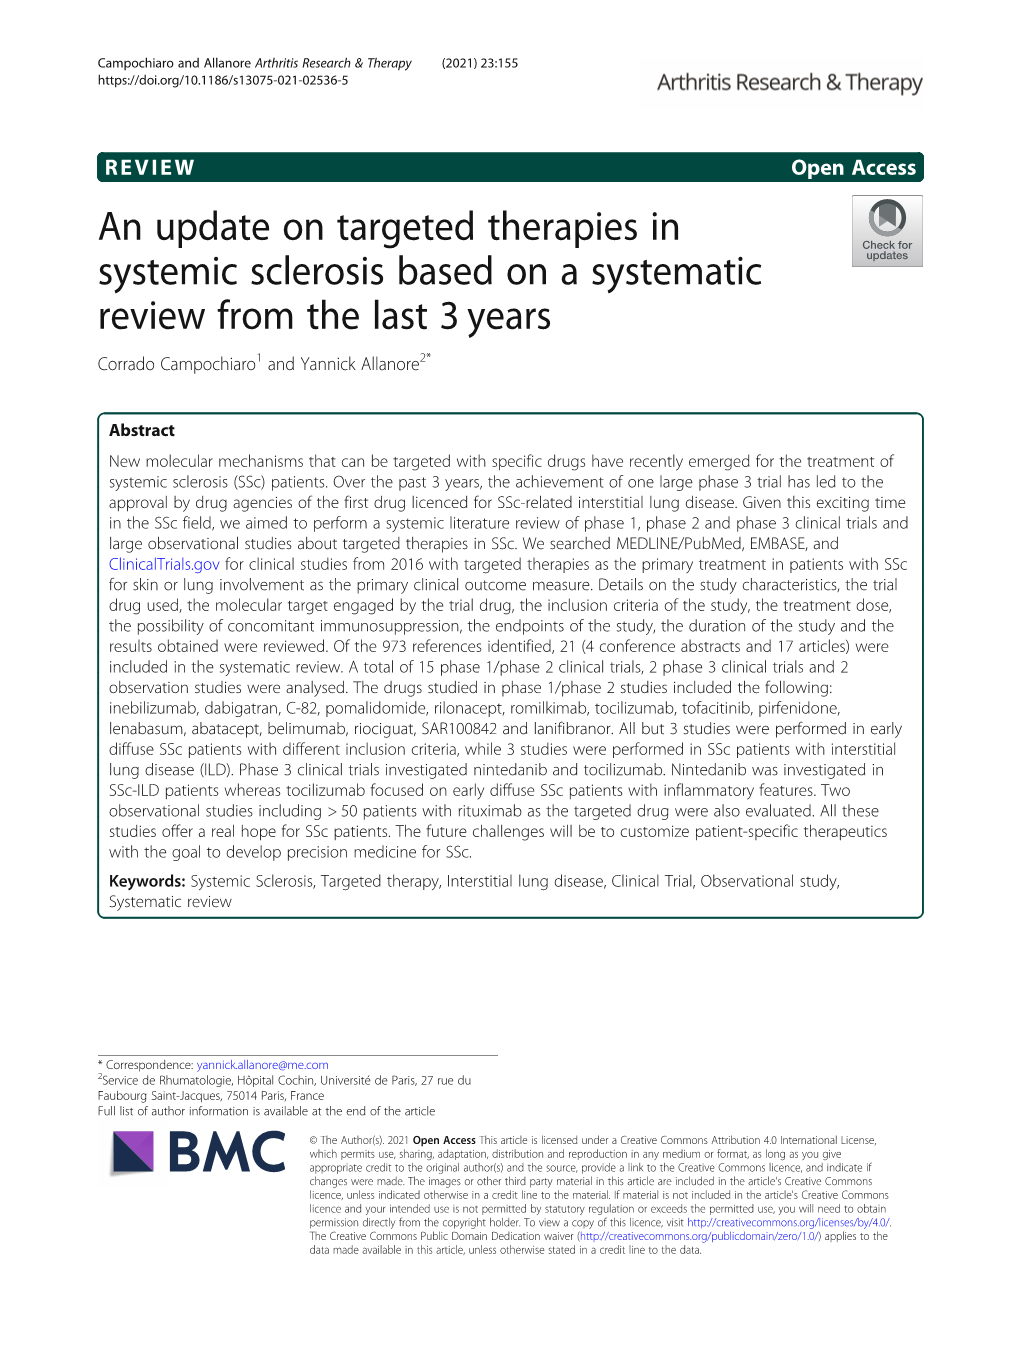 An Update on Targeted Therapies in Systemic Sclerosis Based on a Systematic Review from the Last 3 Years Corrado Campochiaro1 and Yannick Allanore2*